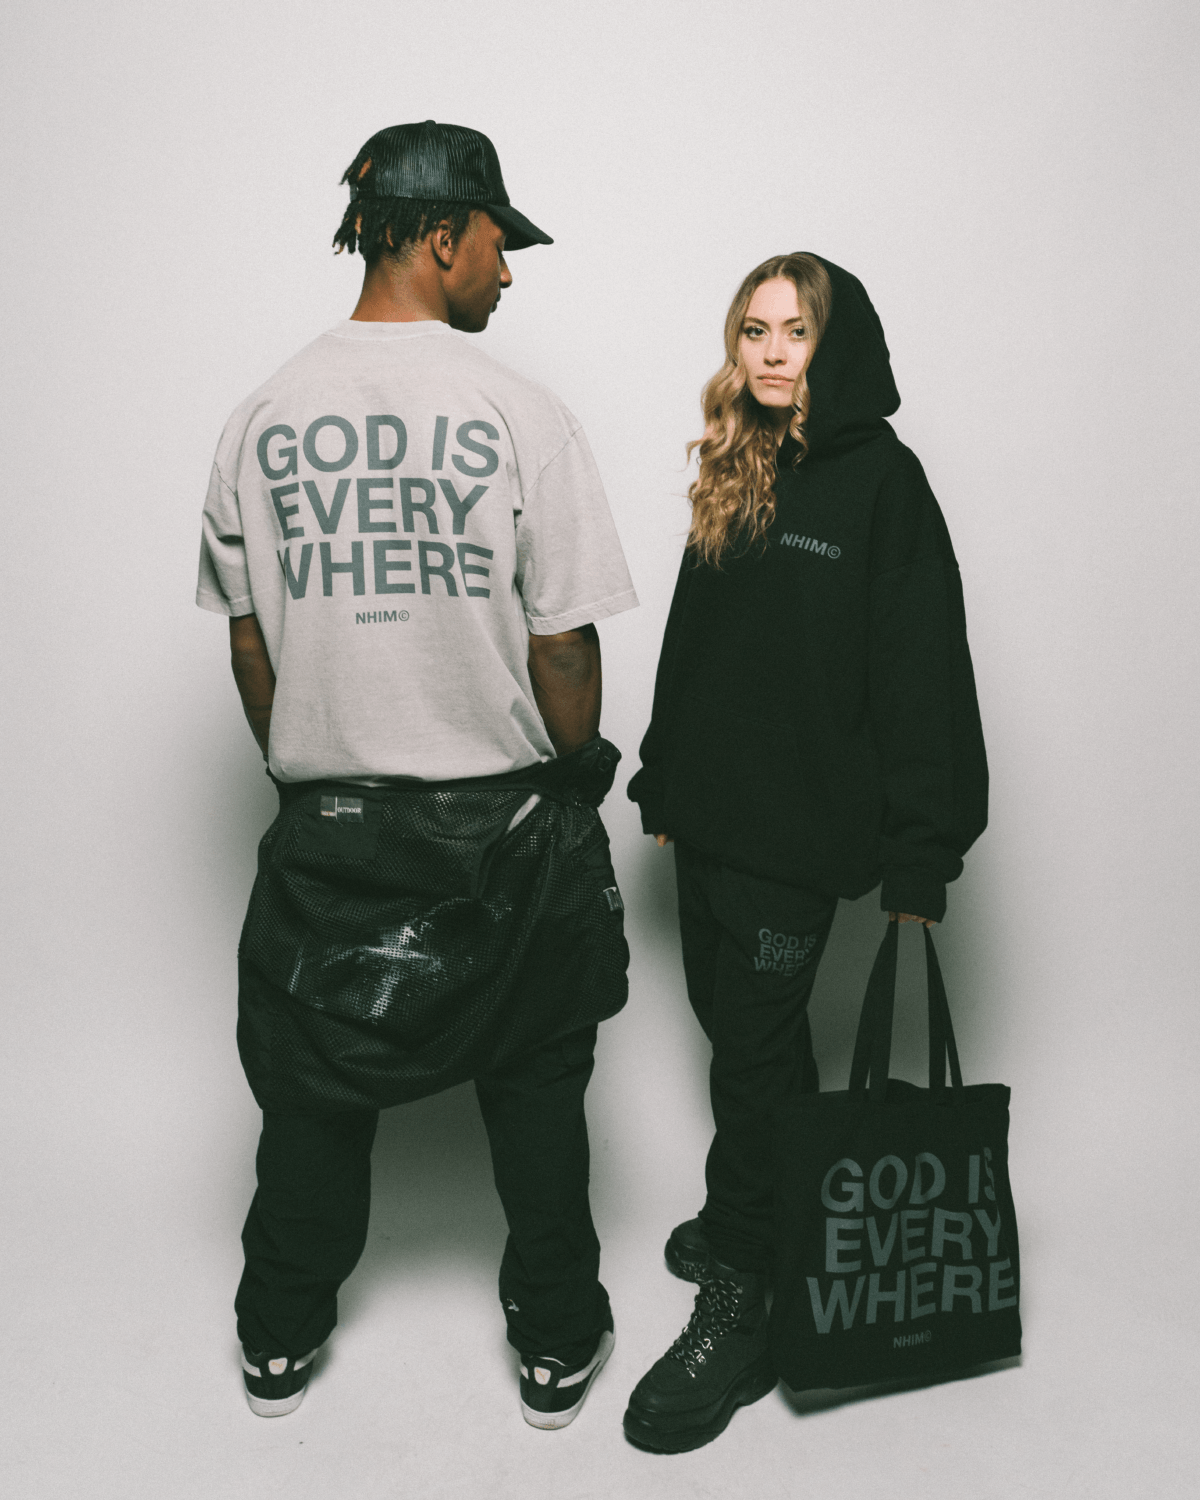 Christian t shirt. God is Everywhere. Made in USA. NHiM Apparel Christian Clothing Company. God is everywhere dark silver t shirt and black hoodie and black tote bag.